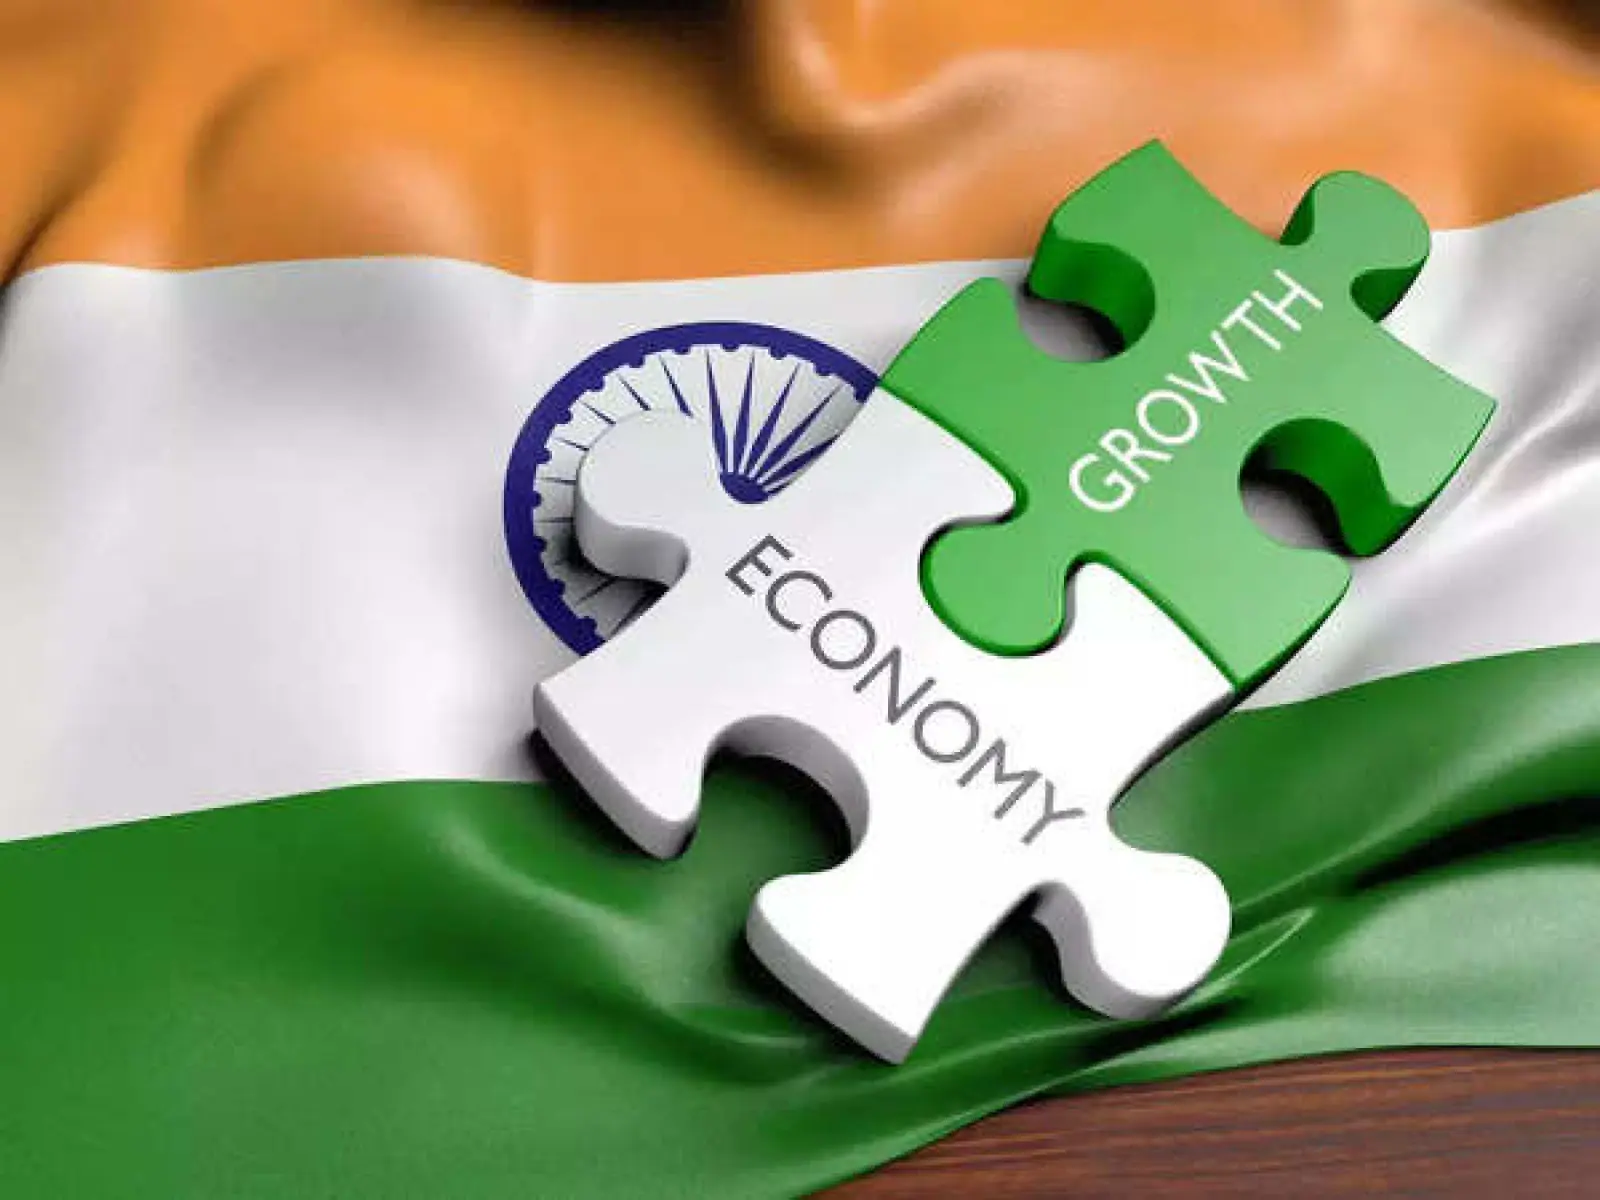 India's growth rate may slow in current fiscal year and next, claims Reuters poll